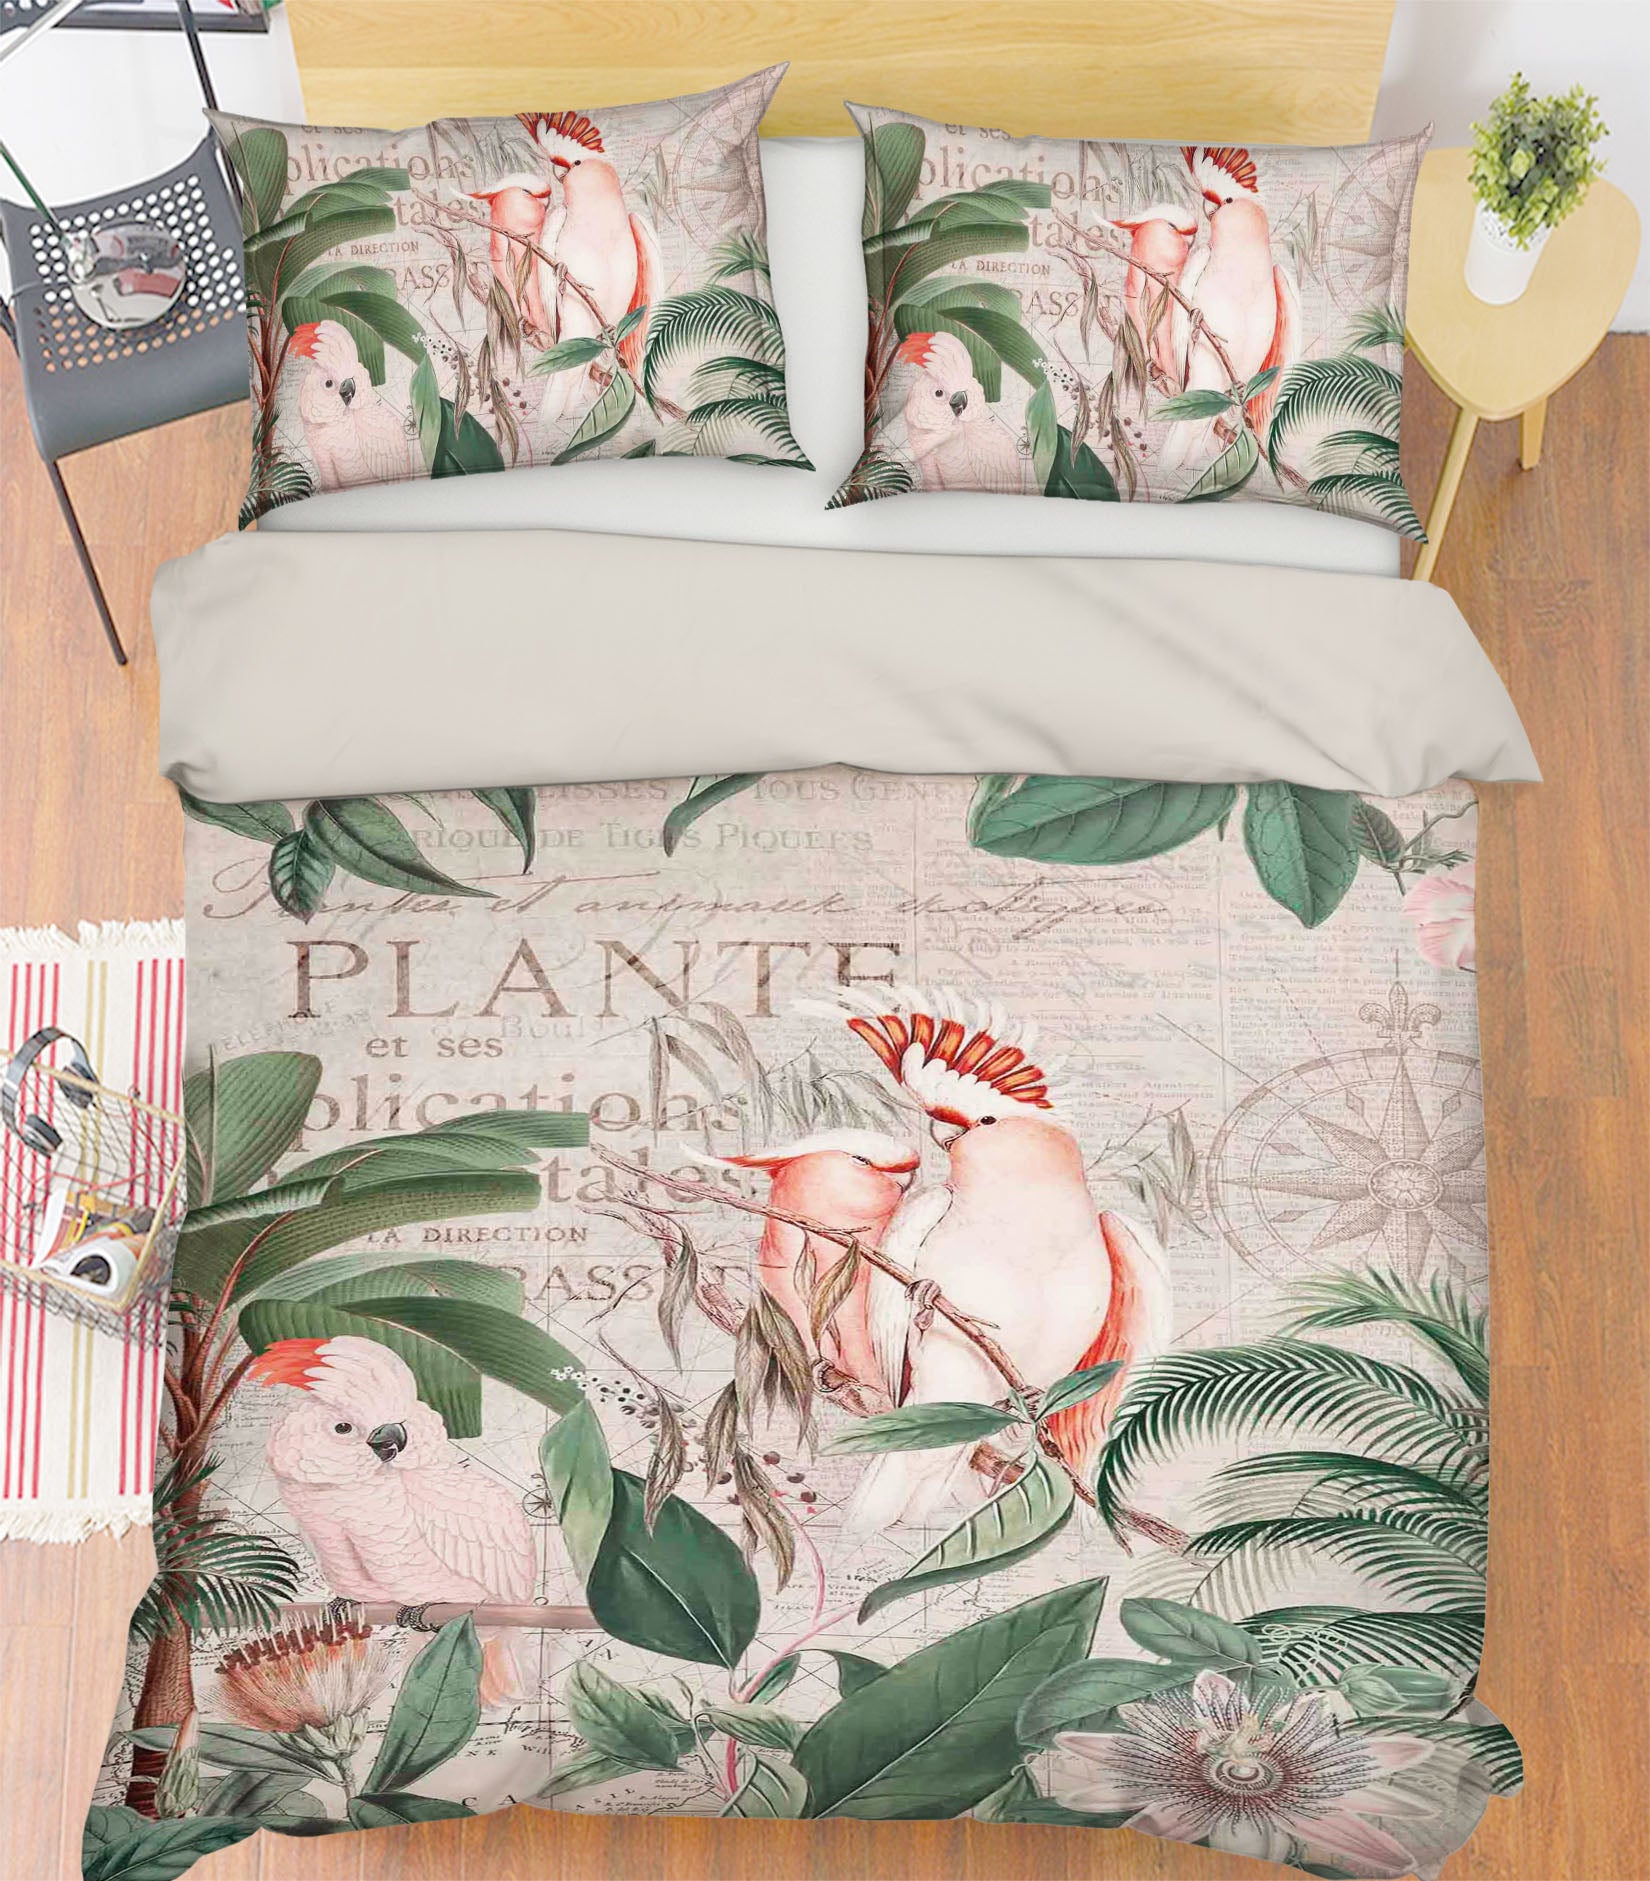 3D Branch Parrot 2141 Andrea haase Bedding Bed Pillowcases Quilt